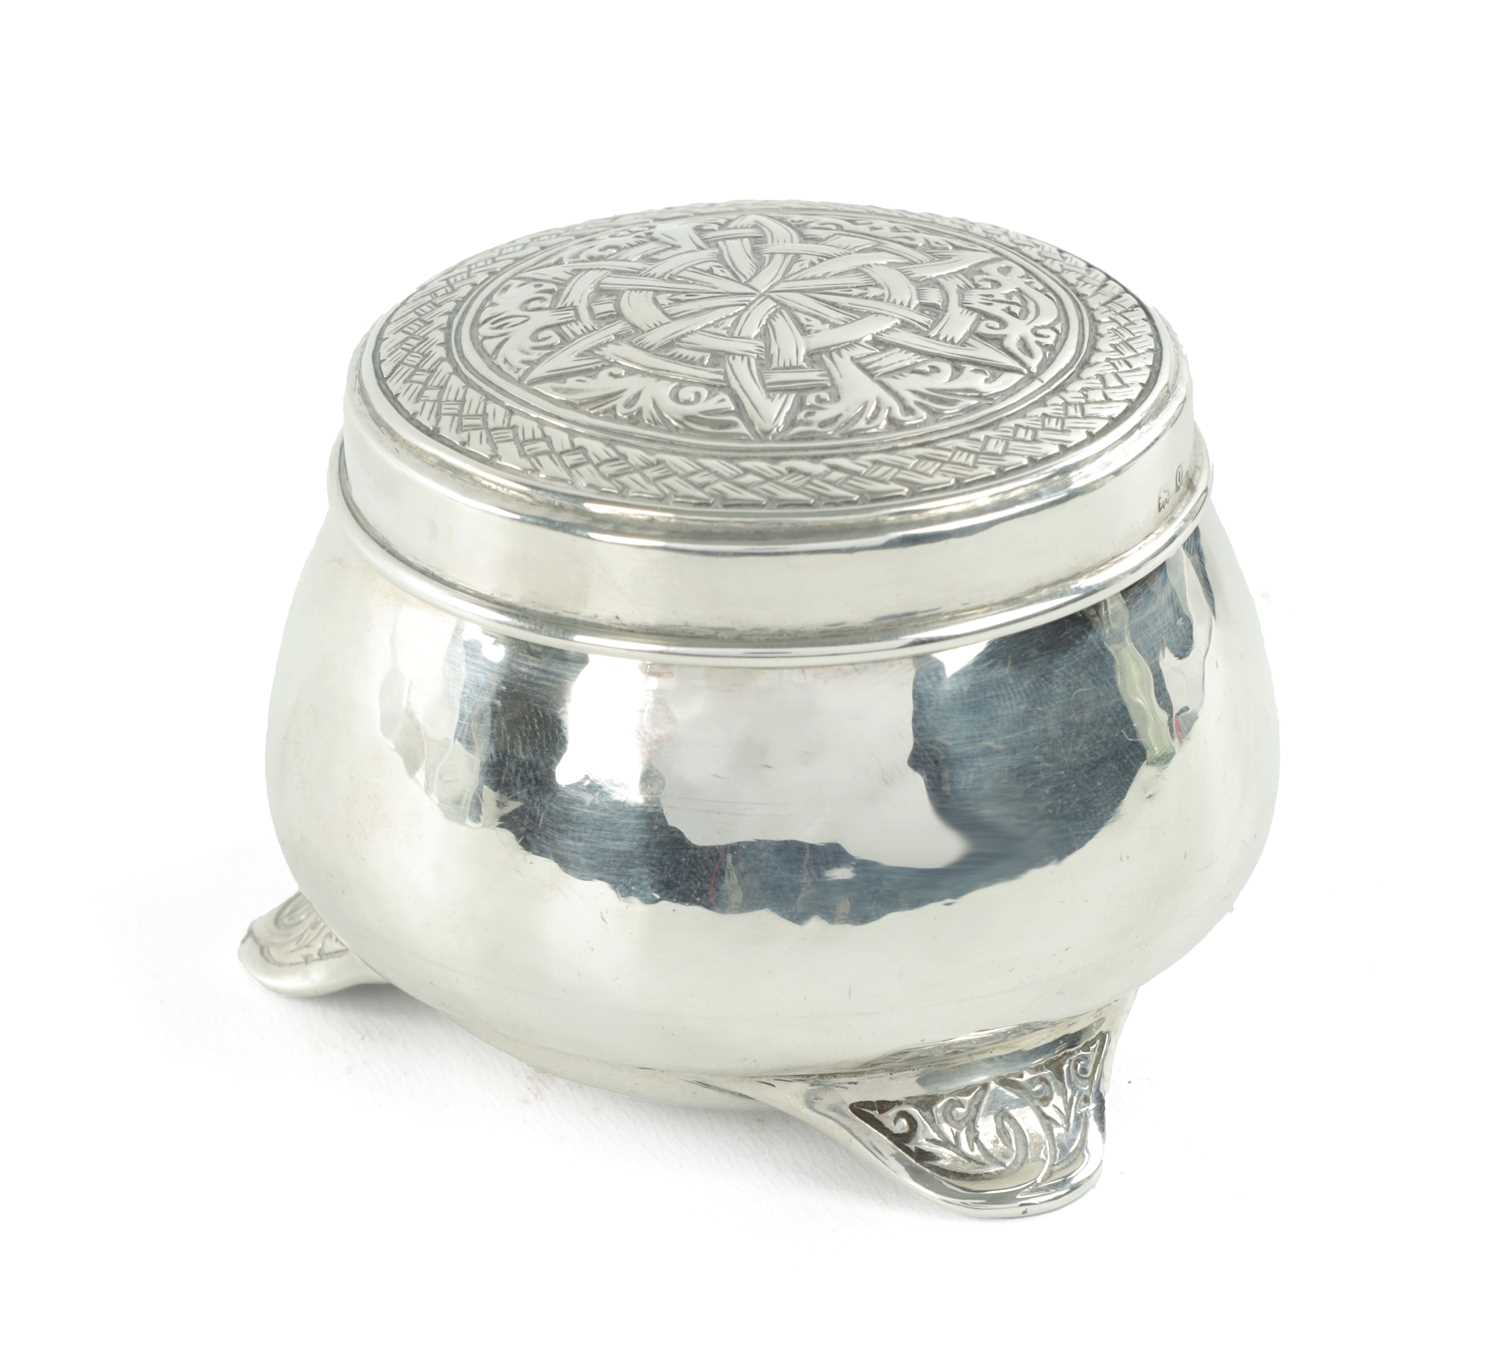 Lot 713 - A LIBERTY & CO. ARTS AND CRAFTS SILVER LIDDED BOX DESIGNED BY BERNARD CUZNER